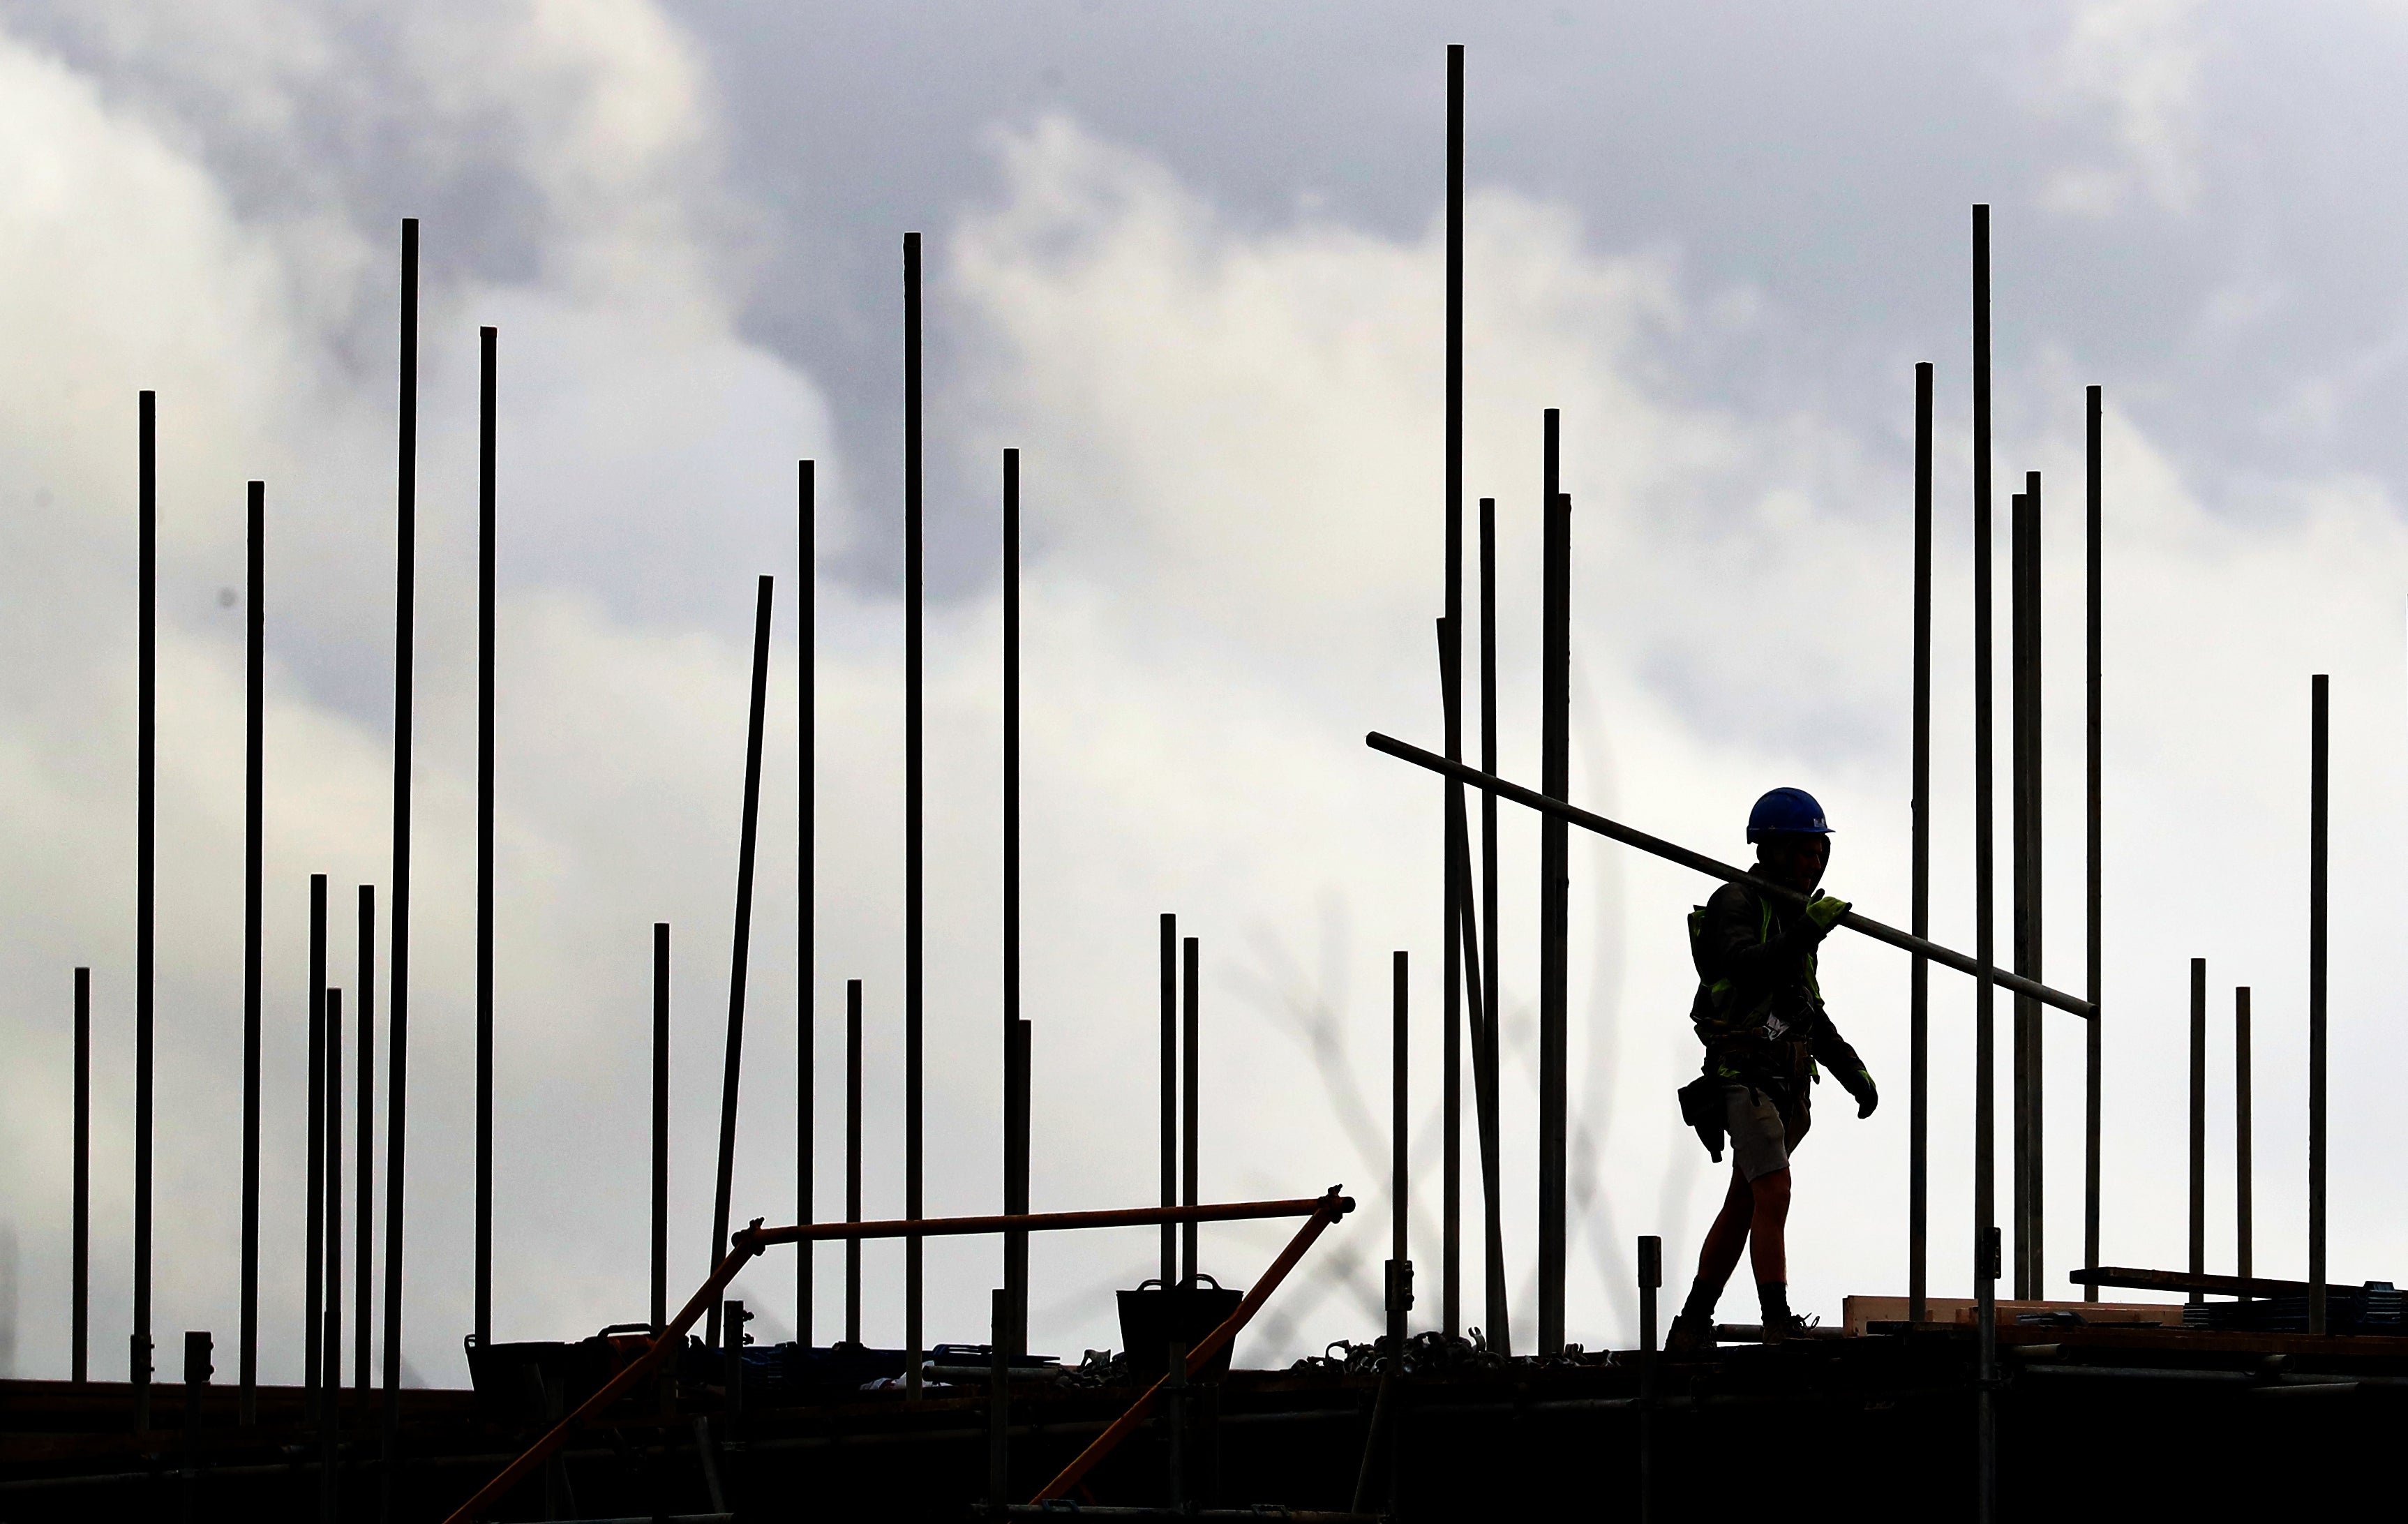 The National House Building Council said the number of new detached homes being registered increased to the highest level in nearly 20 years in the first quarter of 2022 (PA)